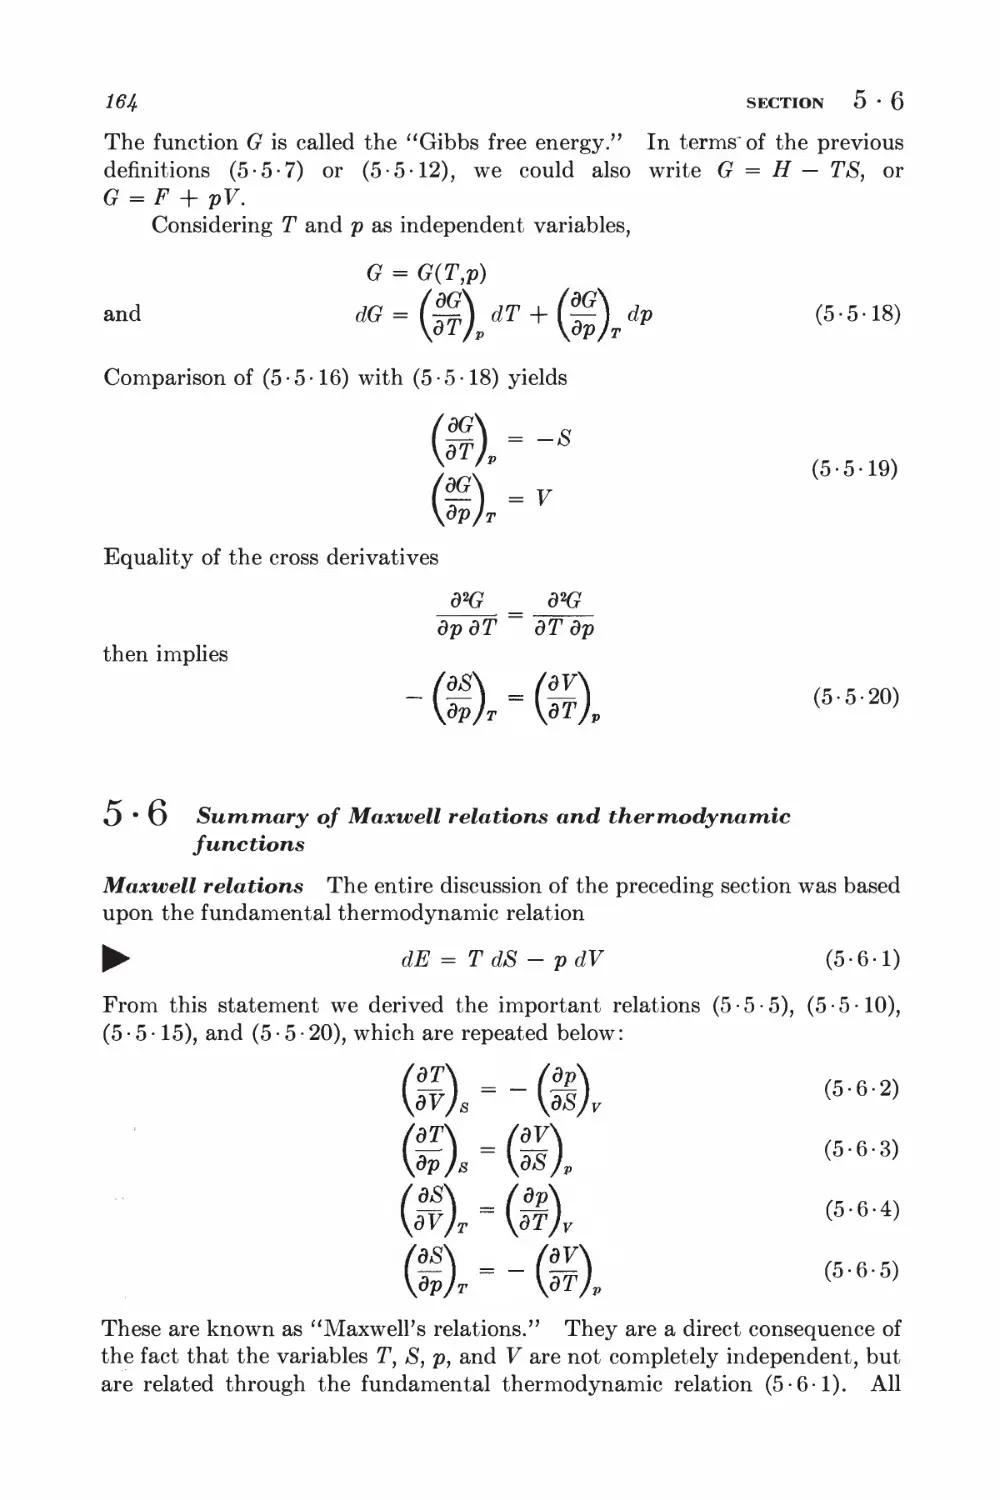 5.6 Summary of Maxwell relations and thermodynamic functions